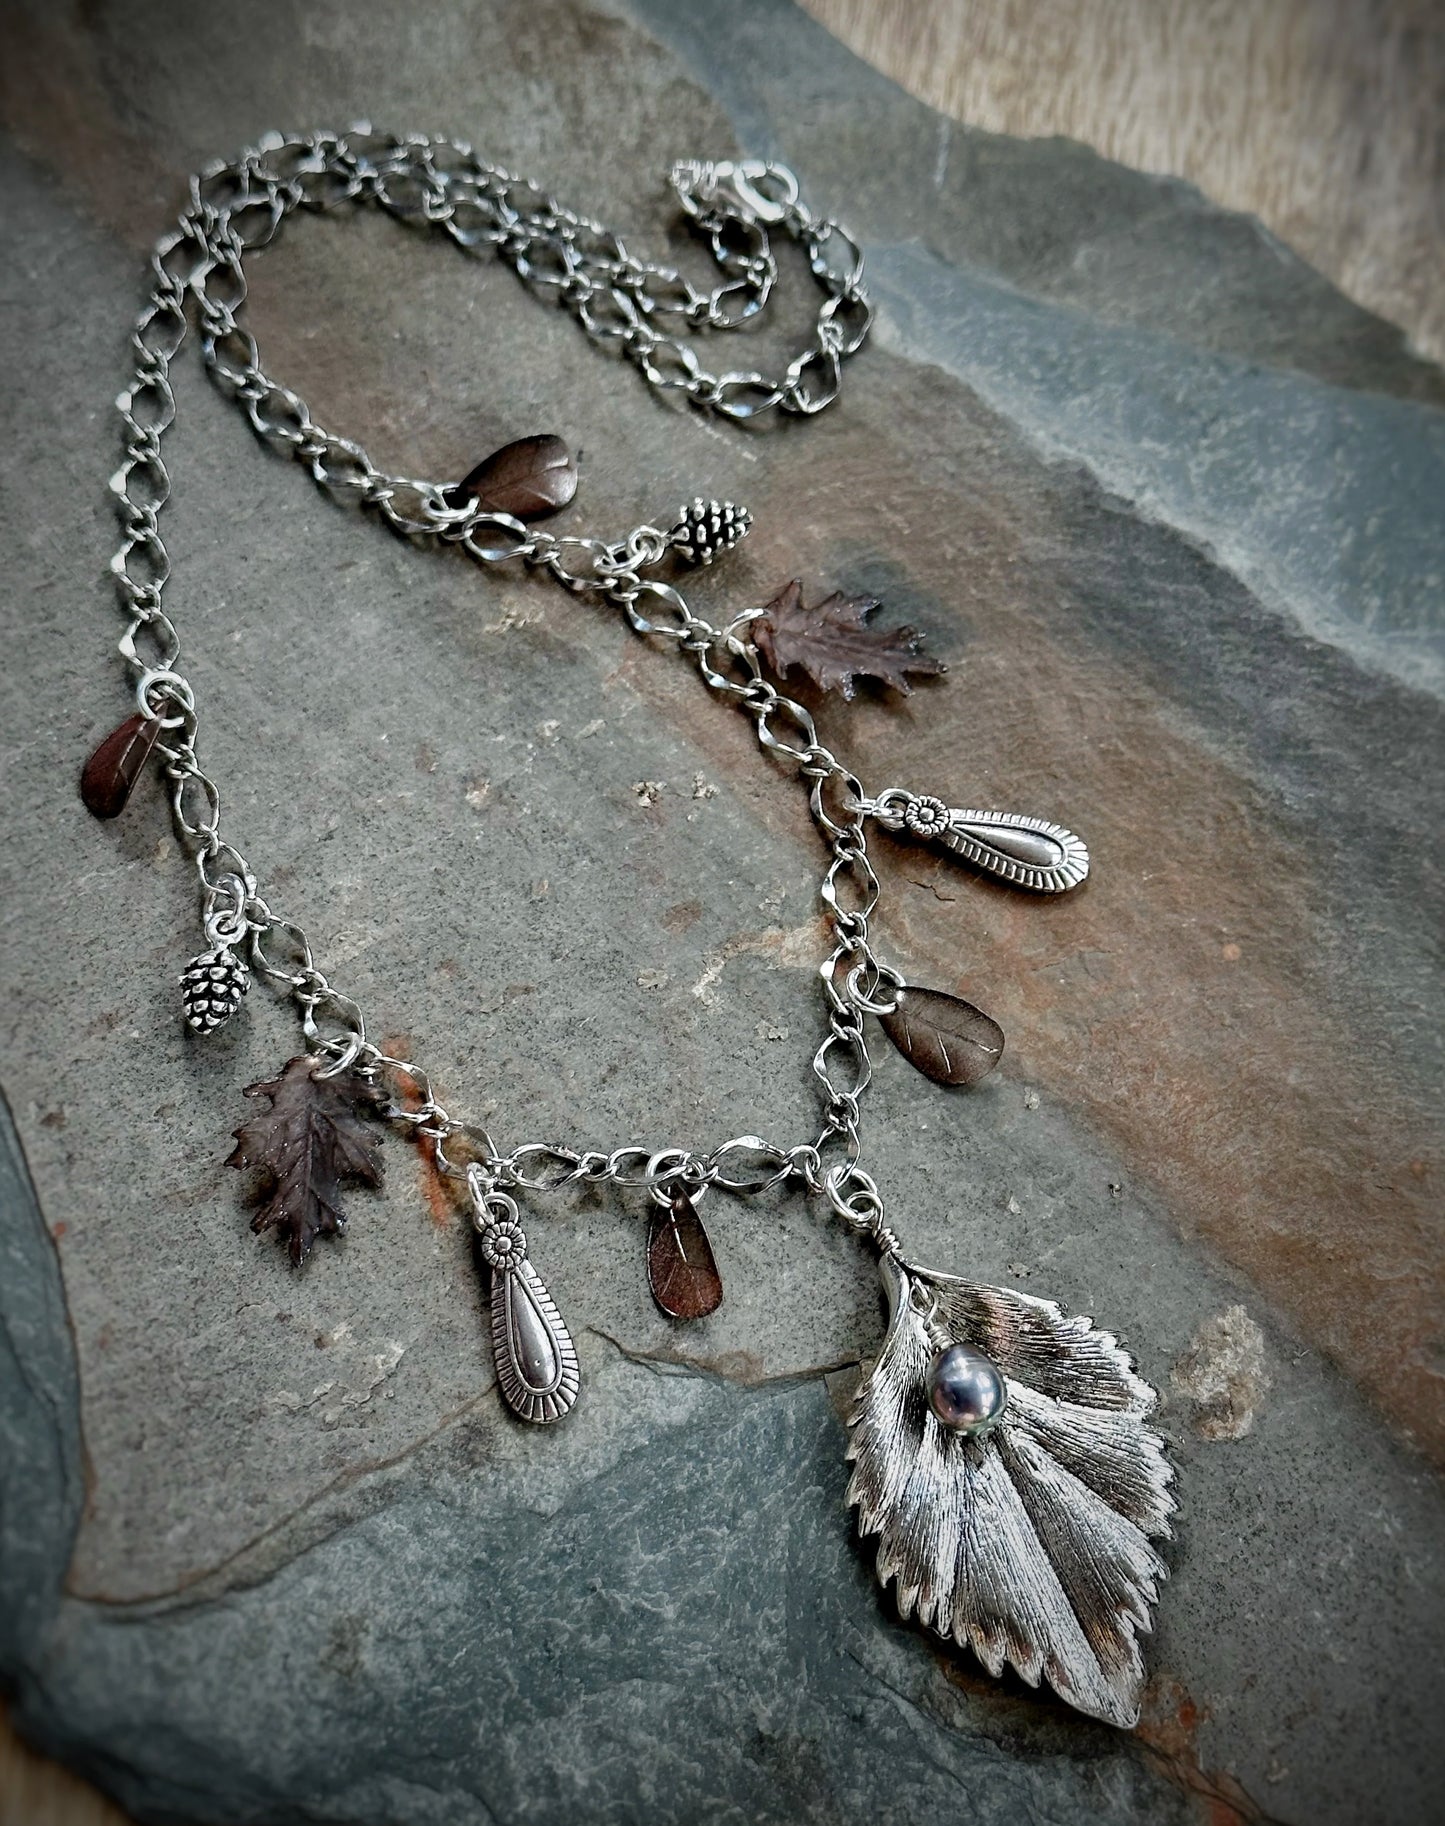 The Glow of Dusk Necklace